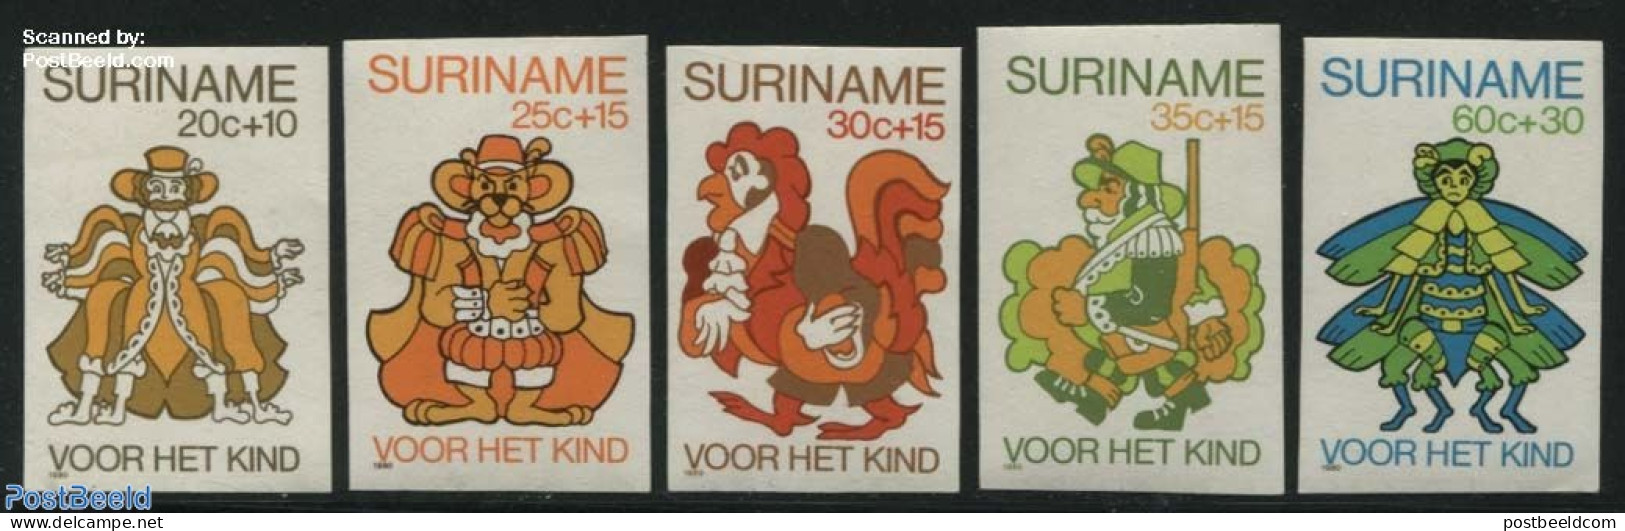 Suriname, Republic 1980 Child Welfare 5v, Imperforated, Mint NH, Nature - Insects - Poultry - Suriname